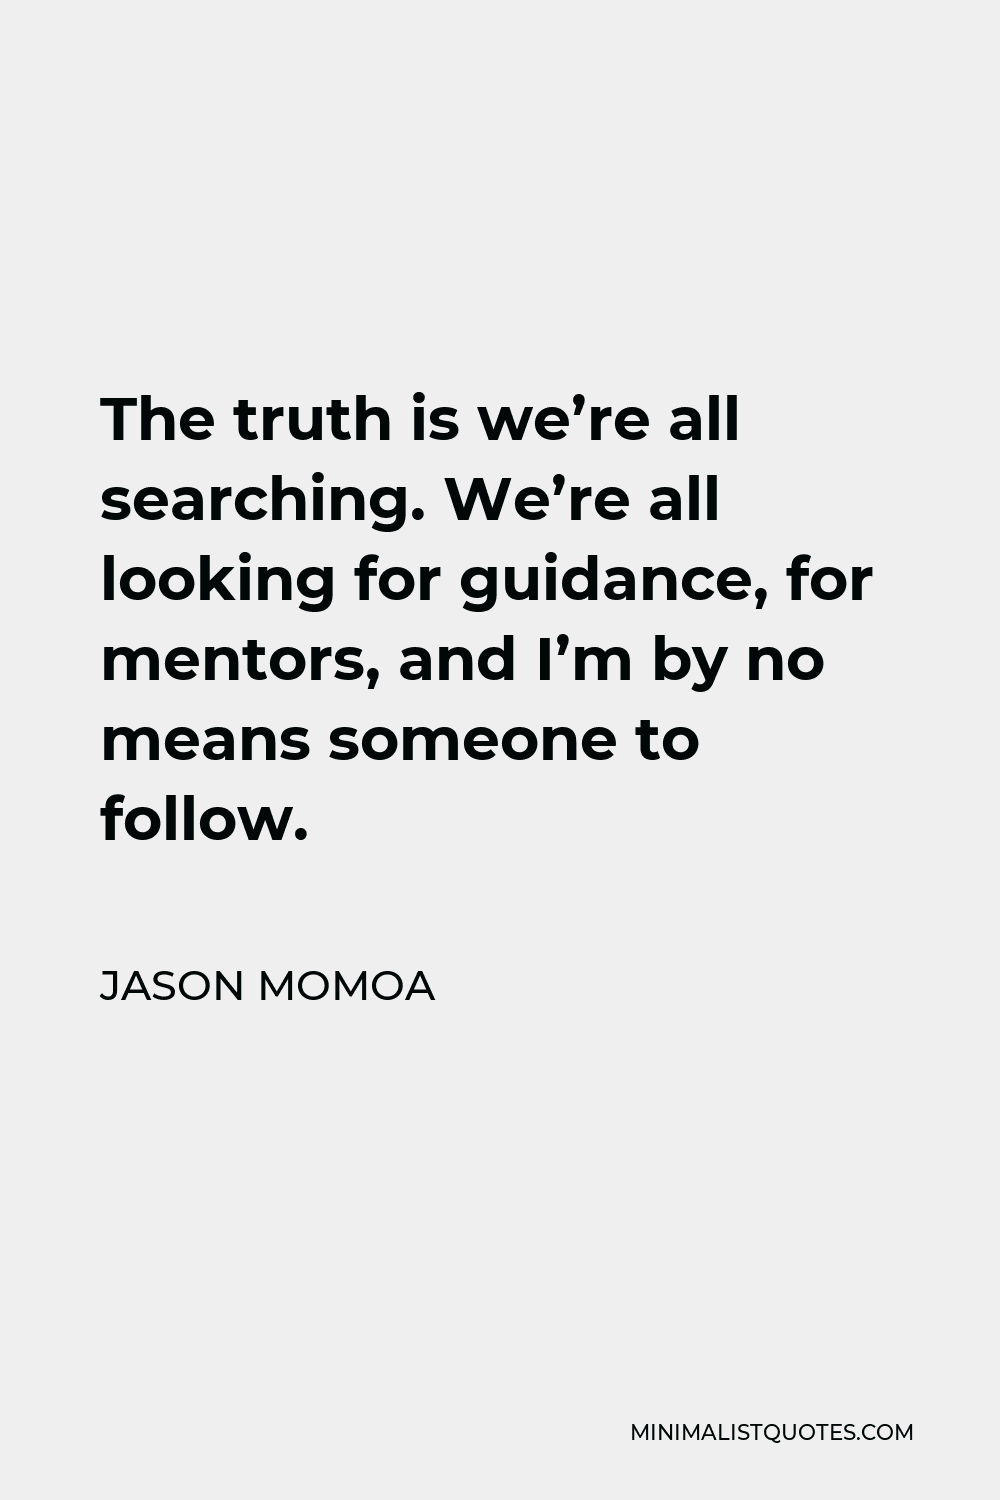 Jason Momoa Quote - The truth is we’re all searching. We’re all looking for guidance, for mentors, and I’m by no means someone to follow.